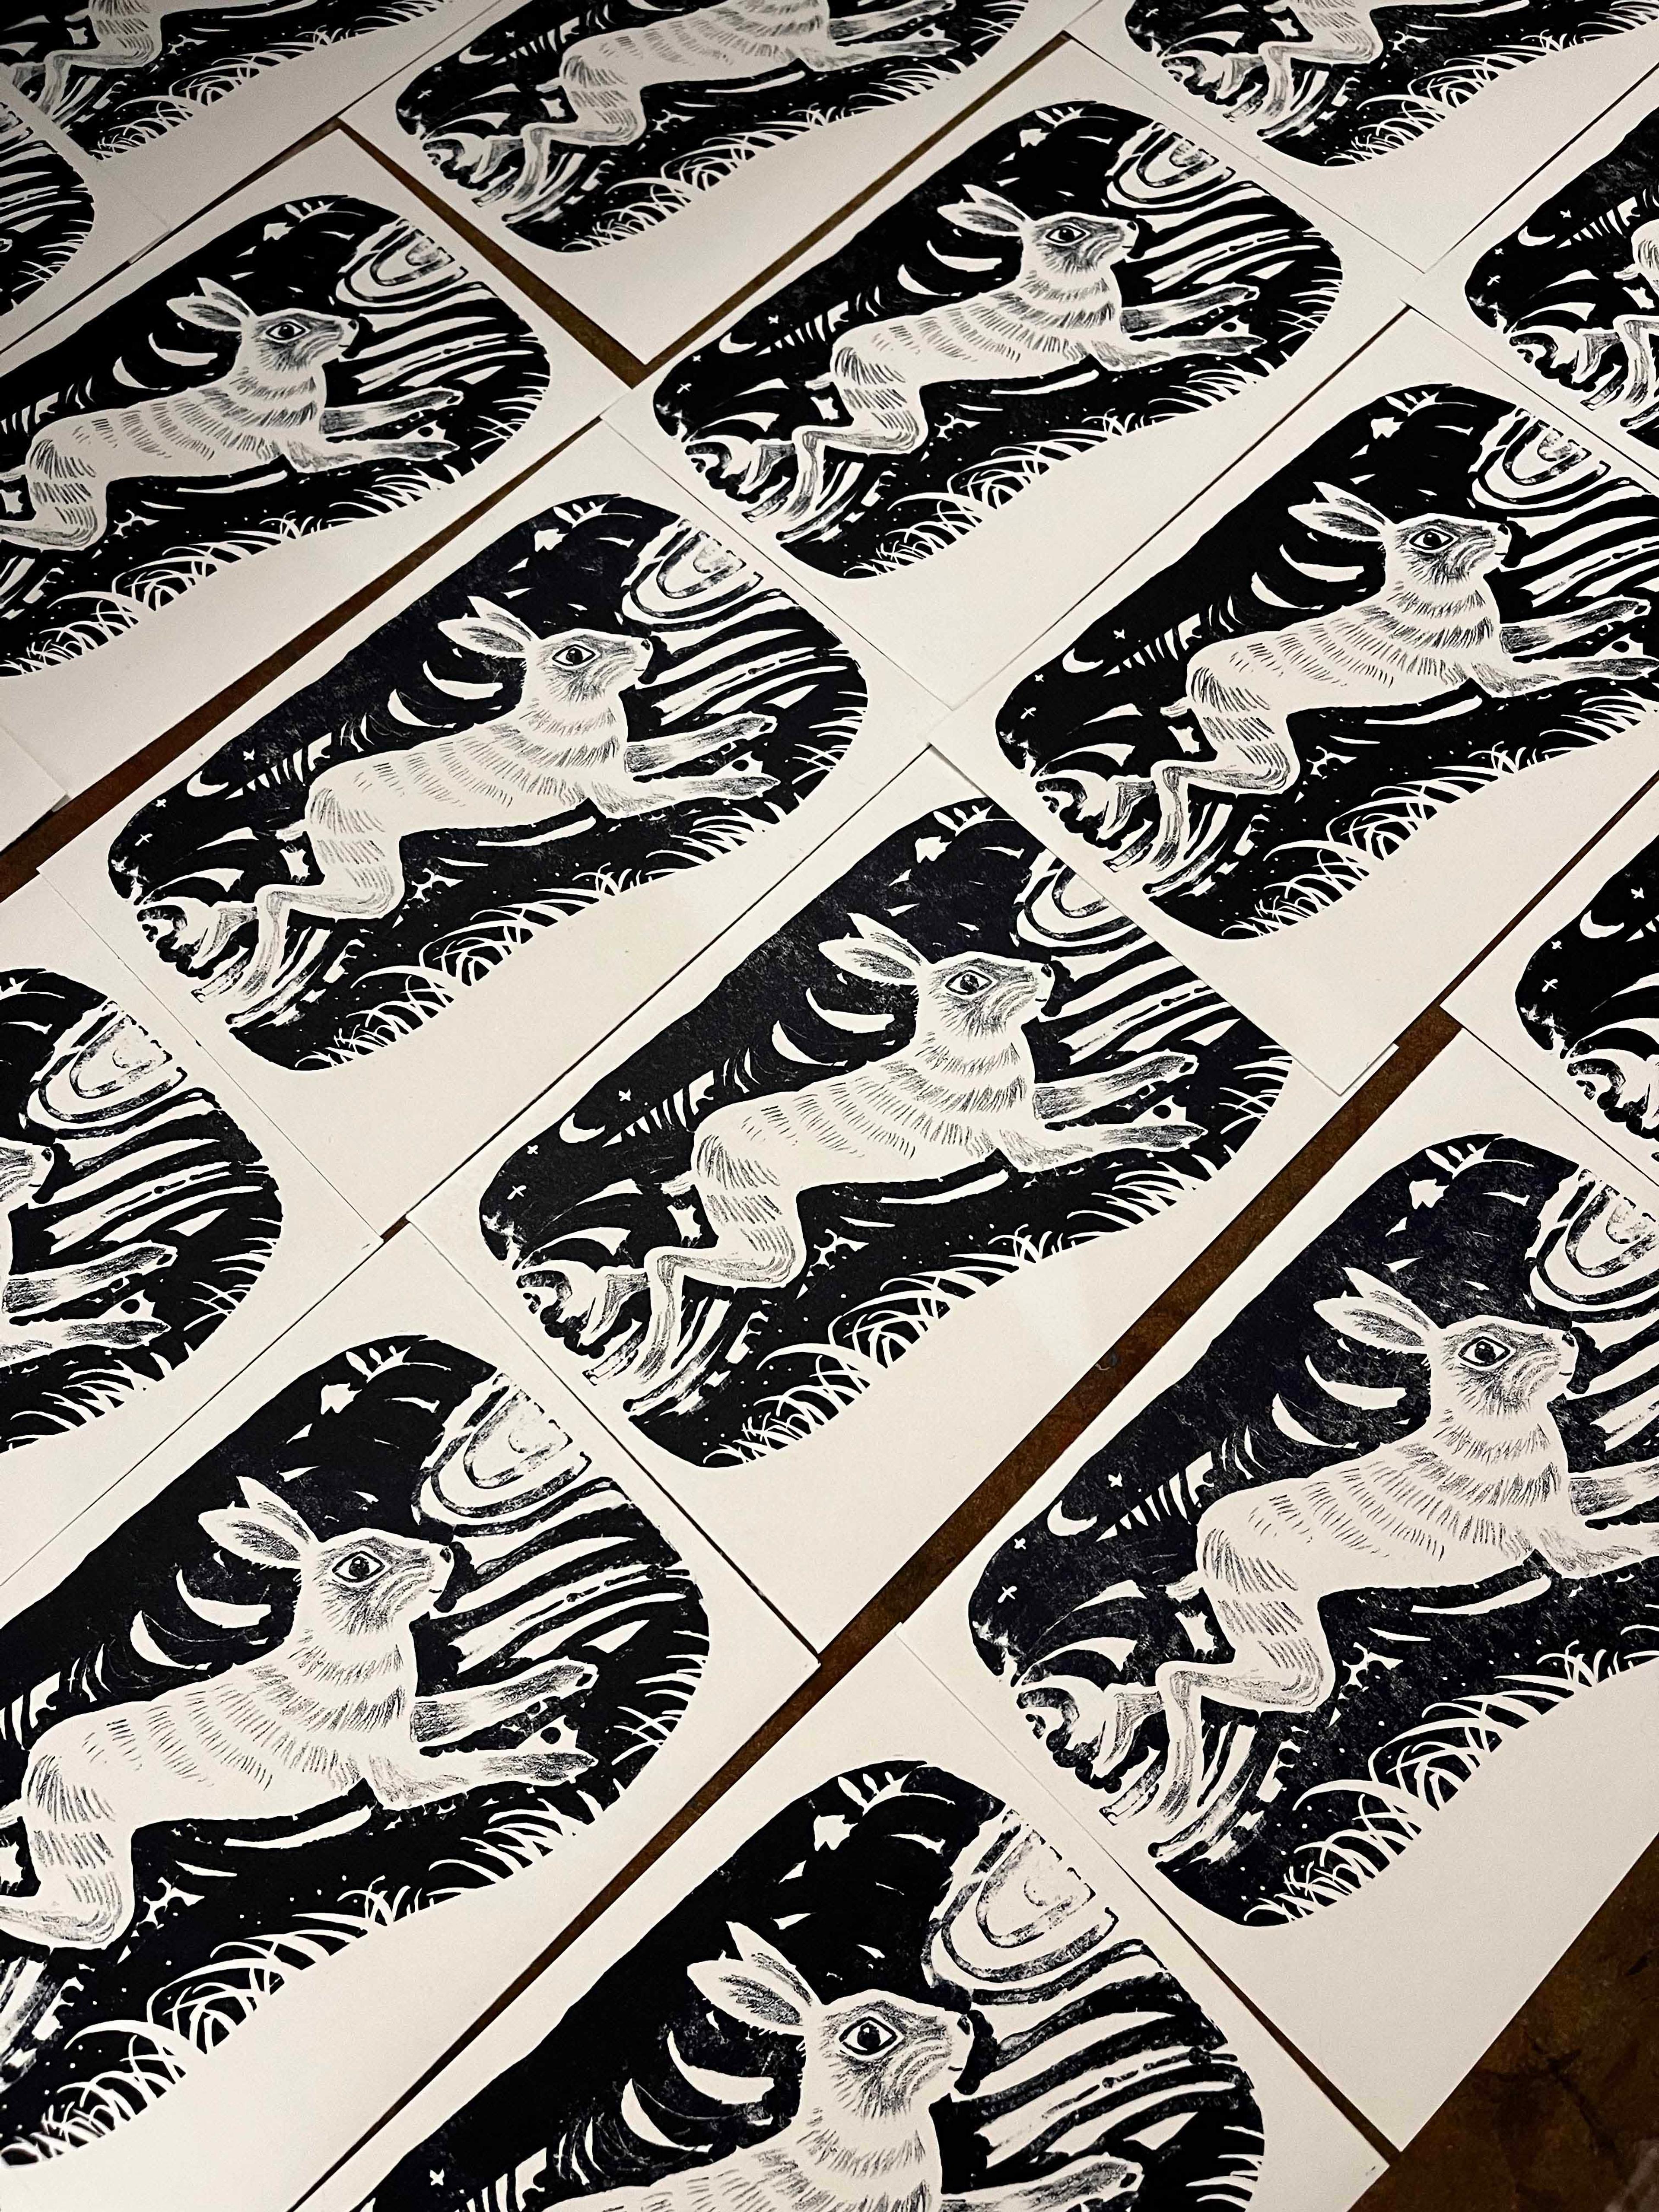 Multiples of lithography prints of a rabbit in black and white.